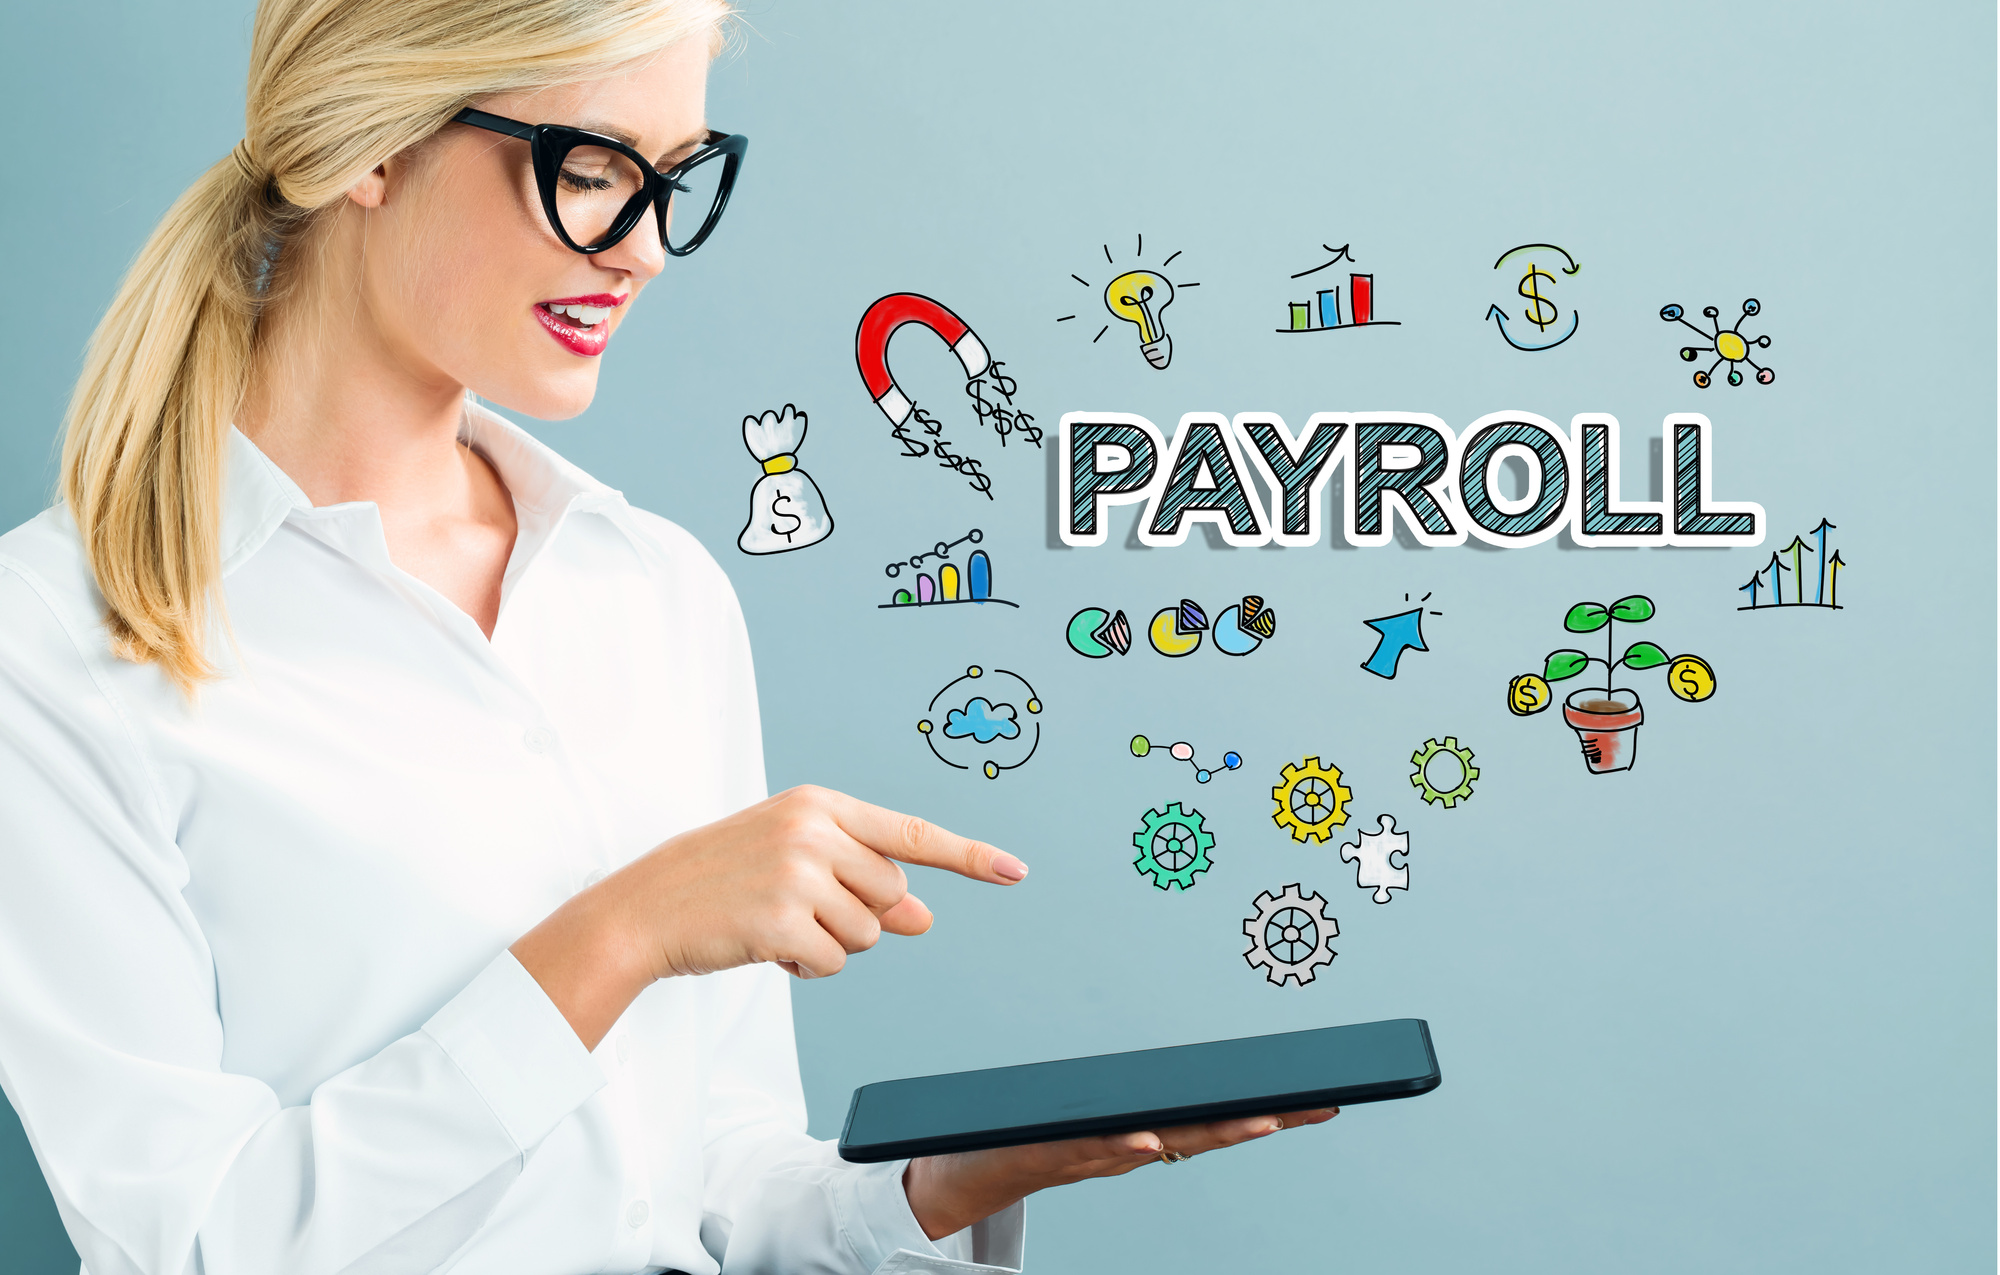 What To Look For In A Payroll Services Company • Online Logo Maker #39 s Blog